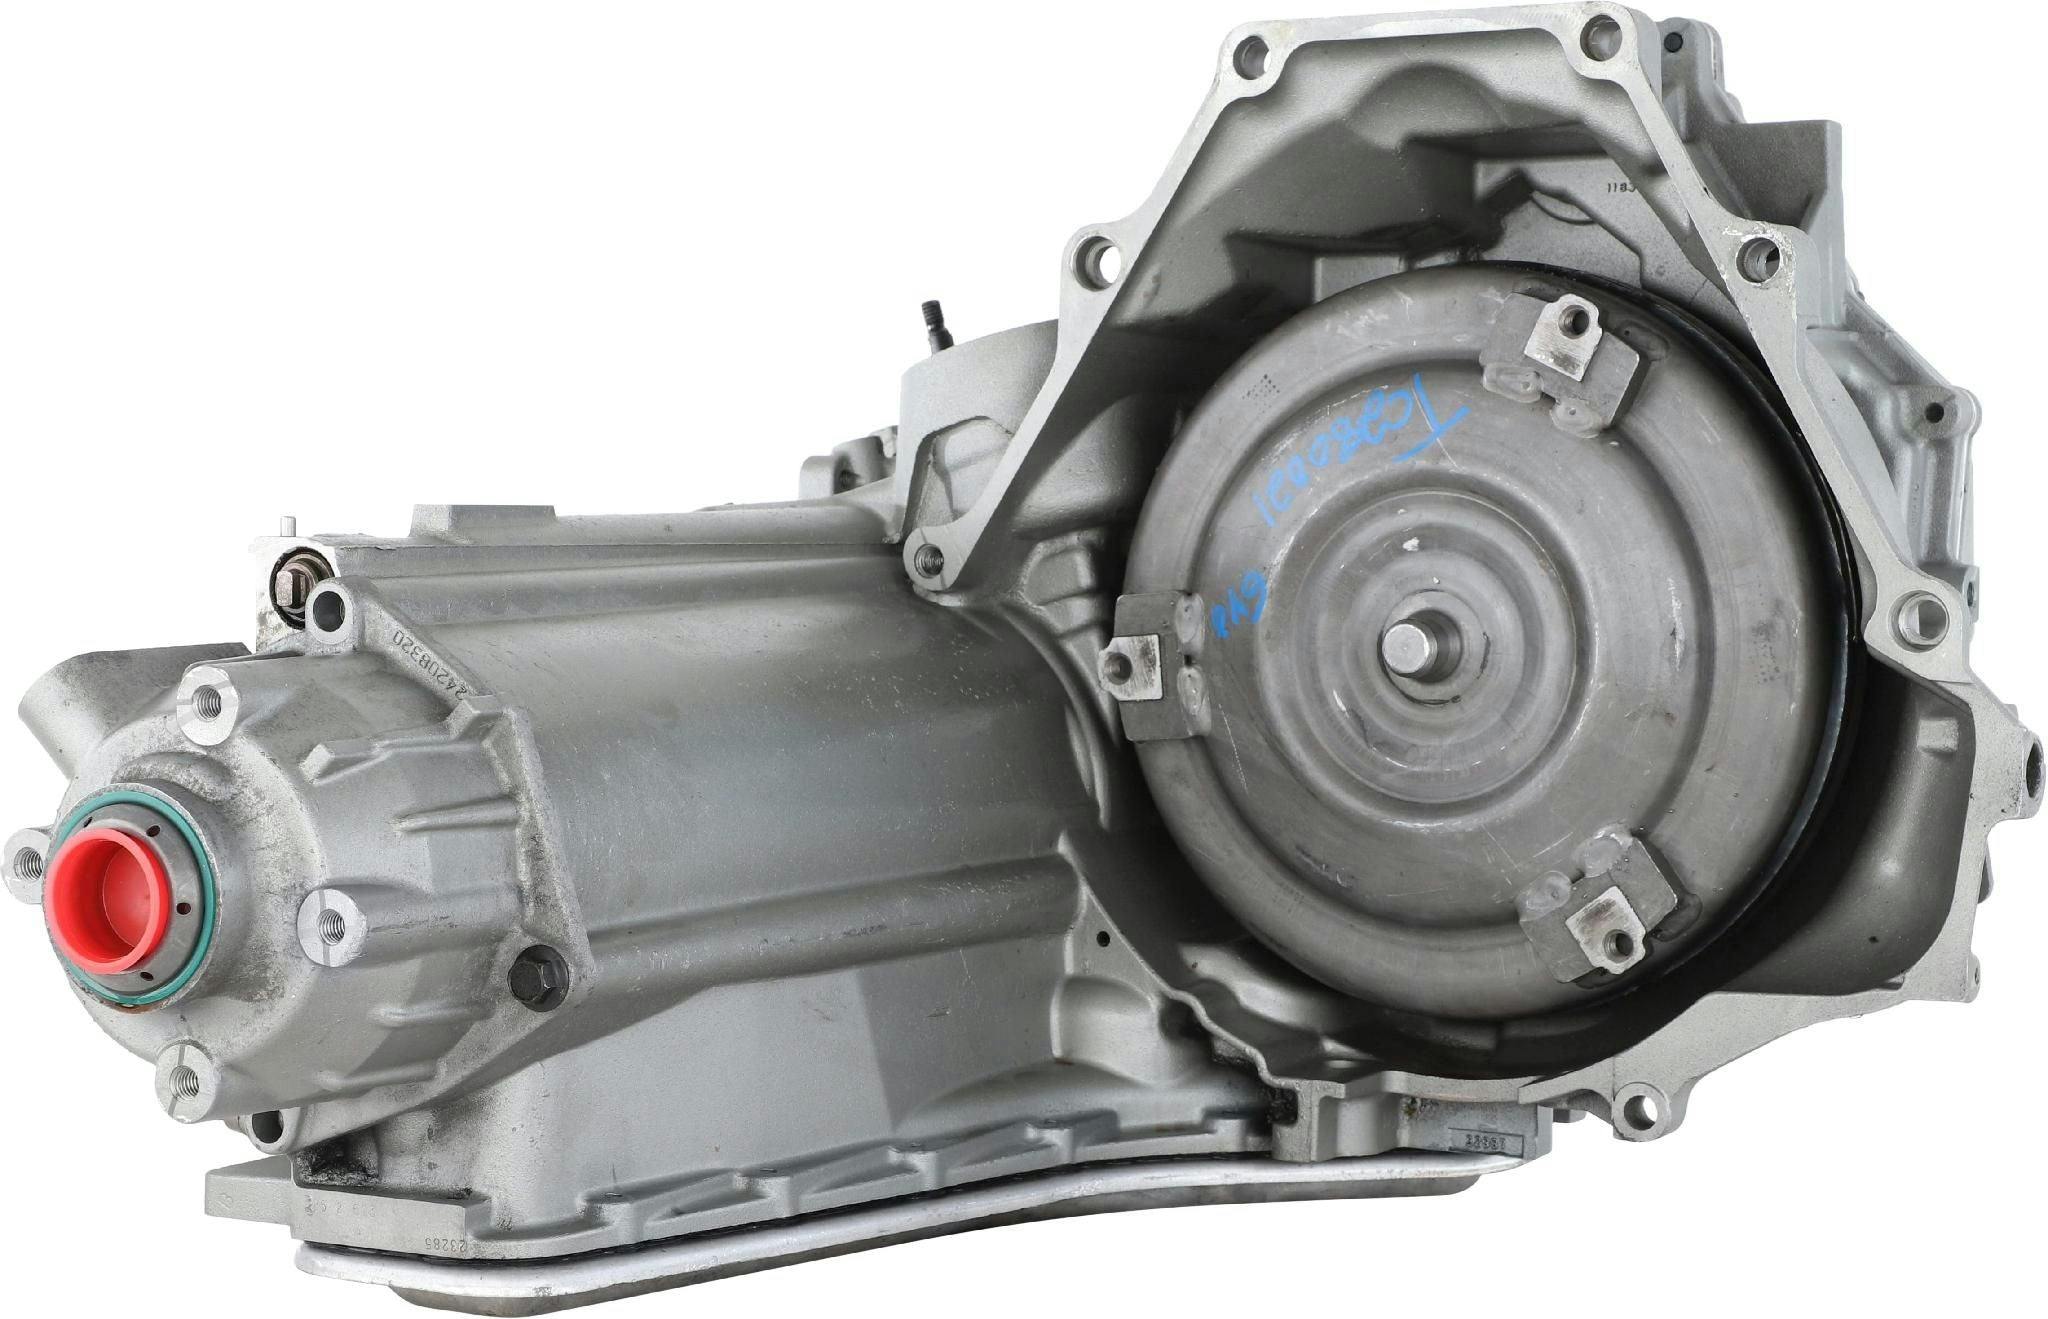 Automatic Transmission for 1999-2002 Buick Regal/Pontiac Grand Prix FWD with 3.8L V6 Engine